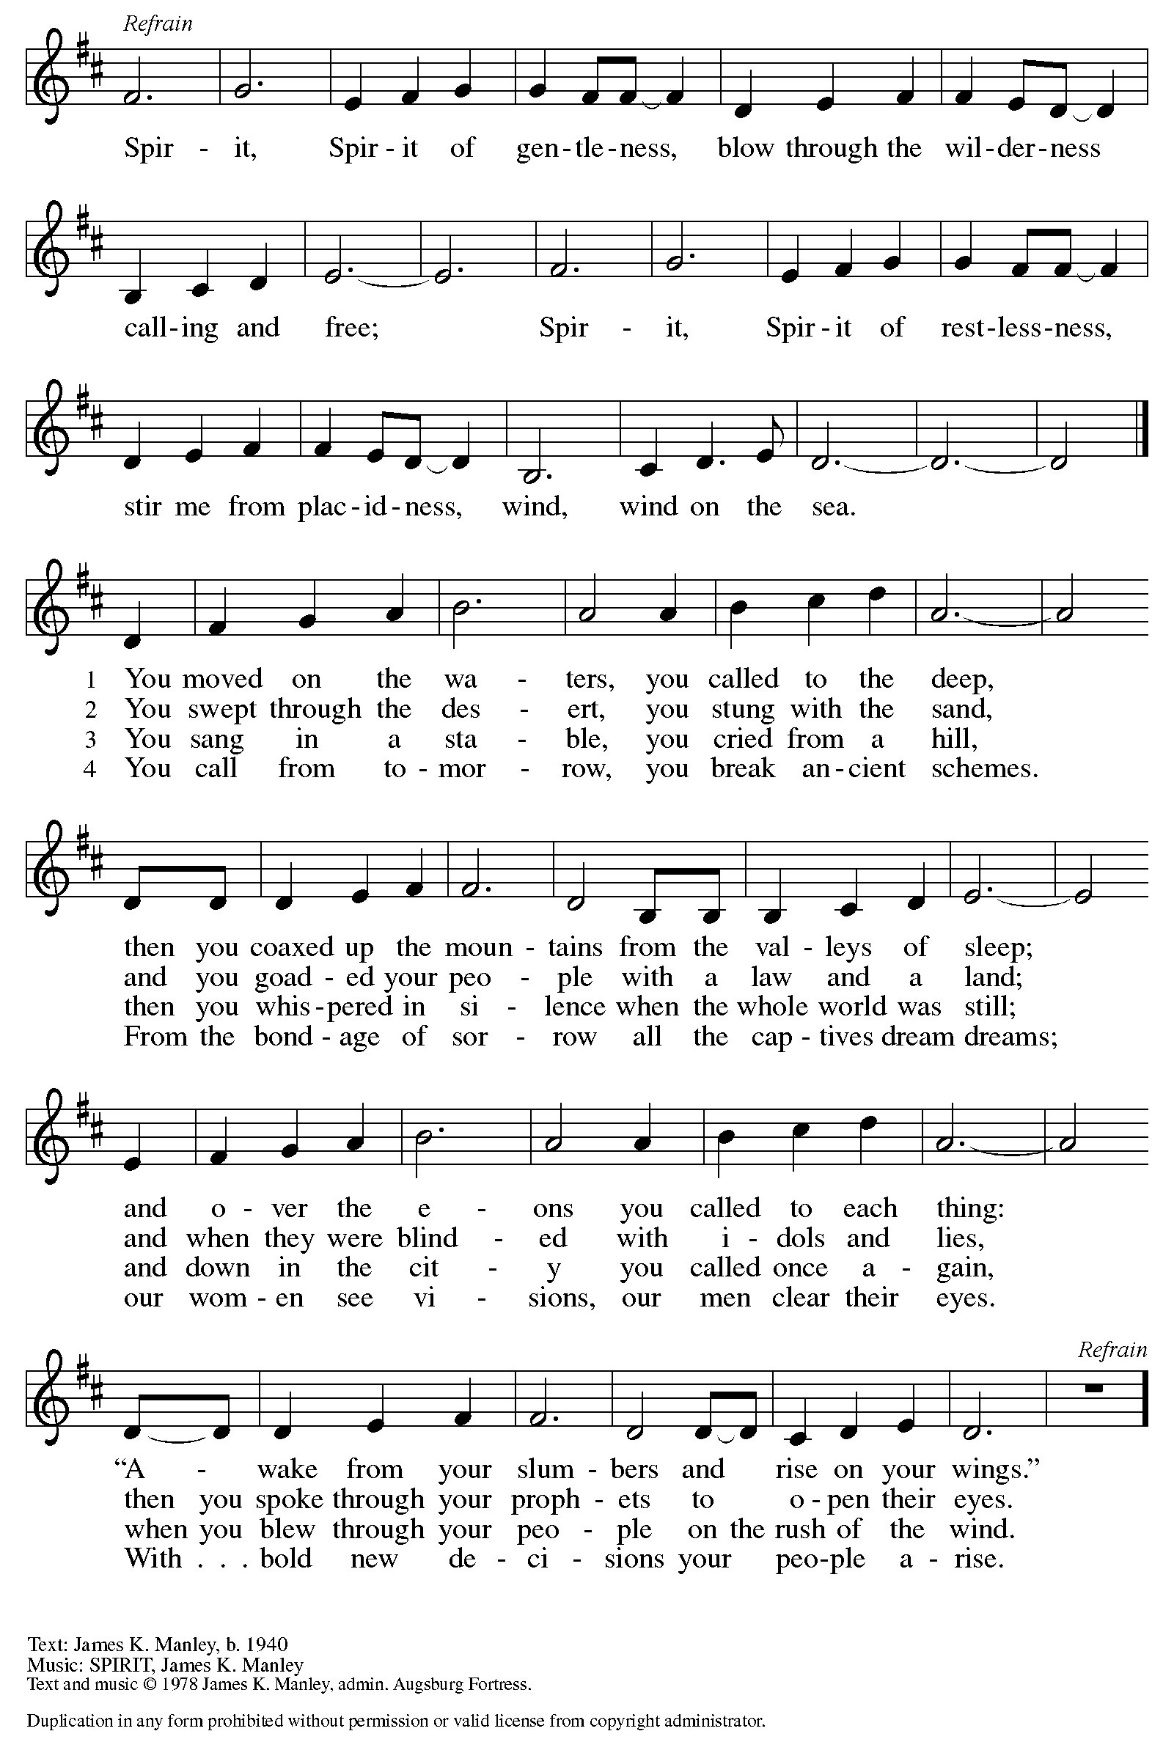 A sheet music with text and notes

Description automatically generated